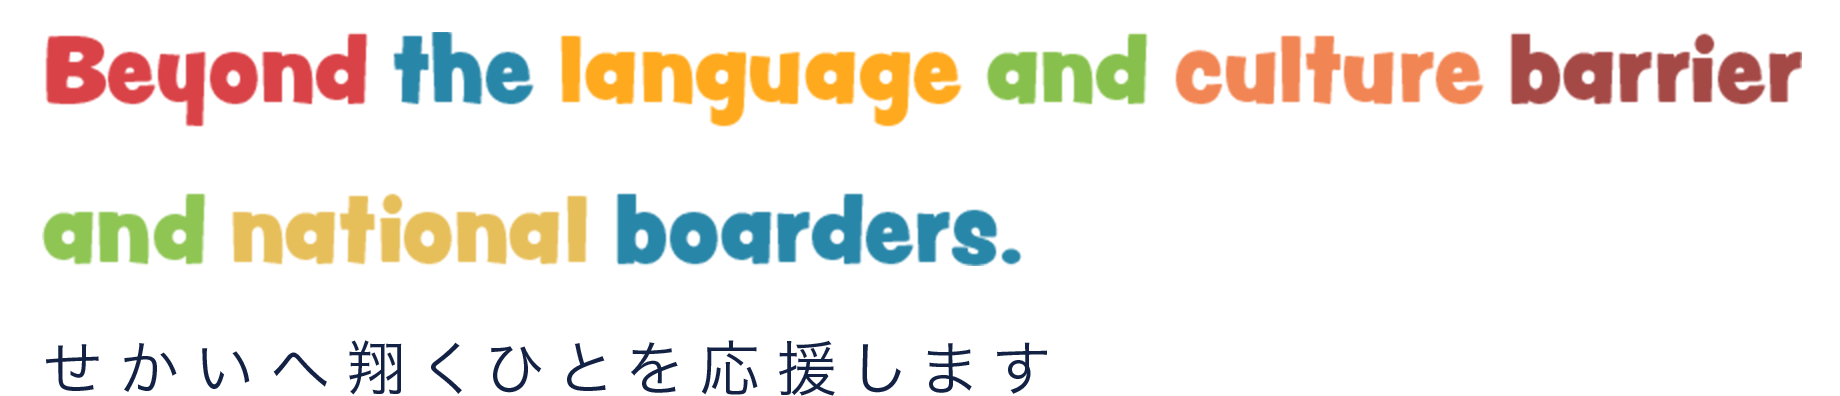 Beyond the language and culture barrier and national boarders.せかいへ翔くひとを応援します